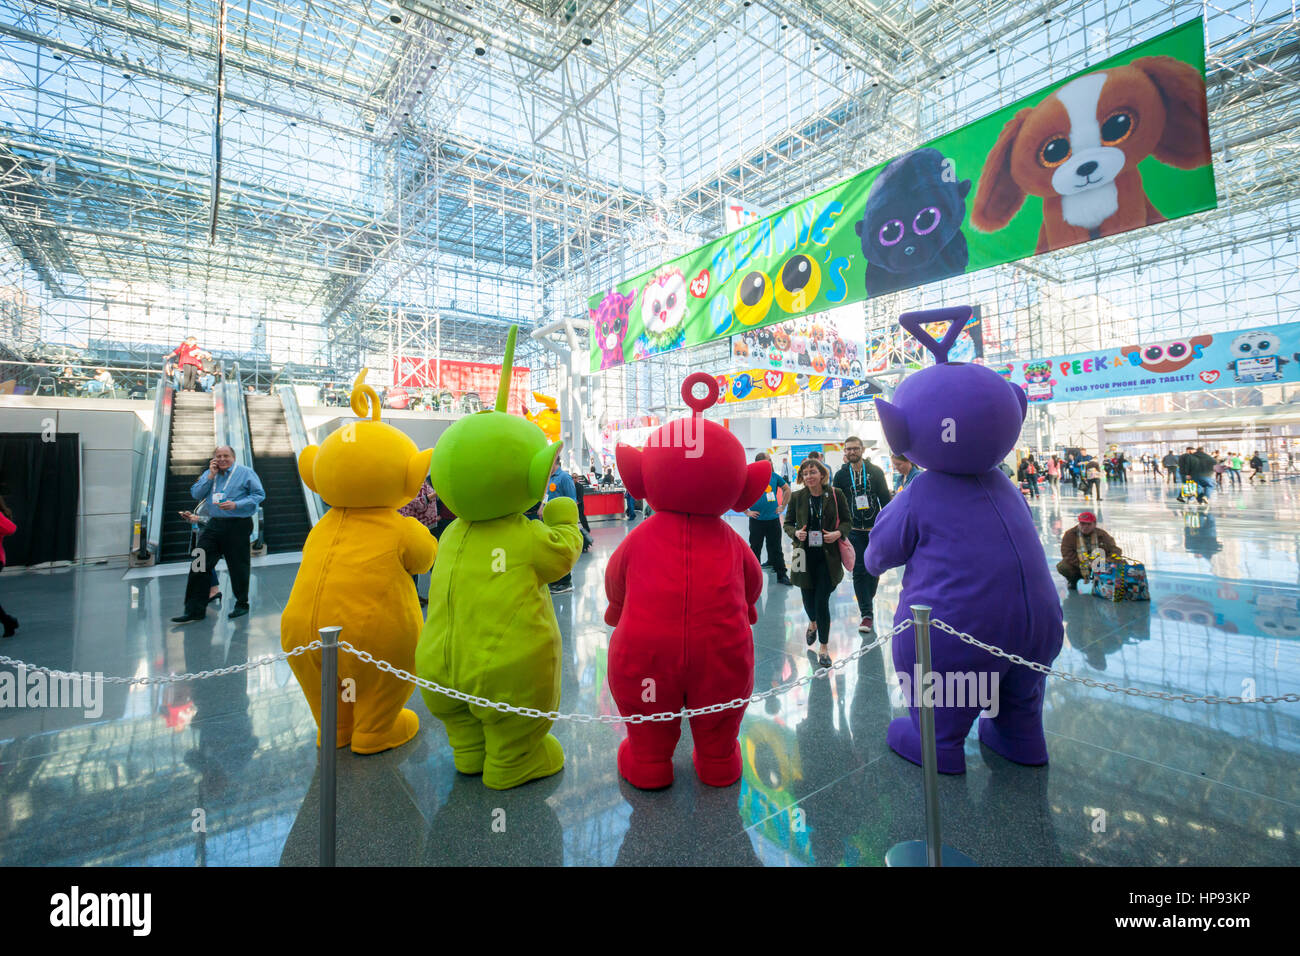 New York, USA. 19th Feb, 2017. Actors dressed as Teletubbies greet visitors at the 114th North American International Toy Fair in the Jacob Javits Convention center in New York on Sunday, February 19, 2017. The four day trade show with over 1000 exhibitors connects buyers and sellers and draws tens of thousands of attendees. The toy industry generates over $26 billion in the U.S. alone and Toy Fair is the largest toy trade show in the Western Hemisphere. ( © Richard B. Levine) Credit: Richard Levine/Alamy Live News Stock Photo